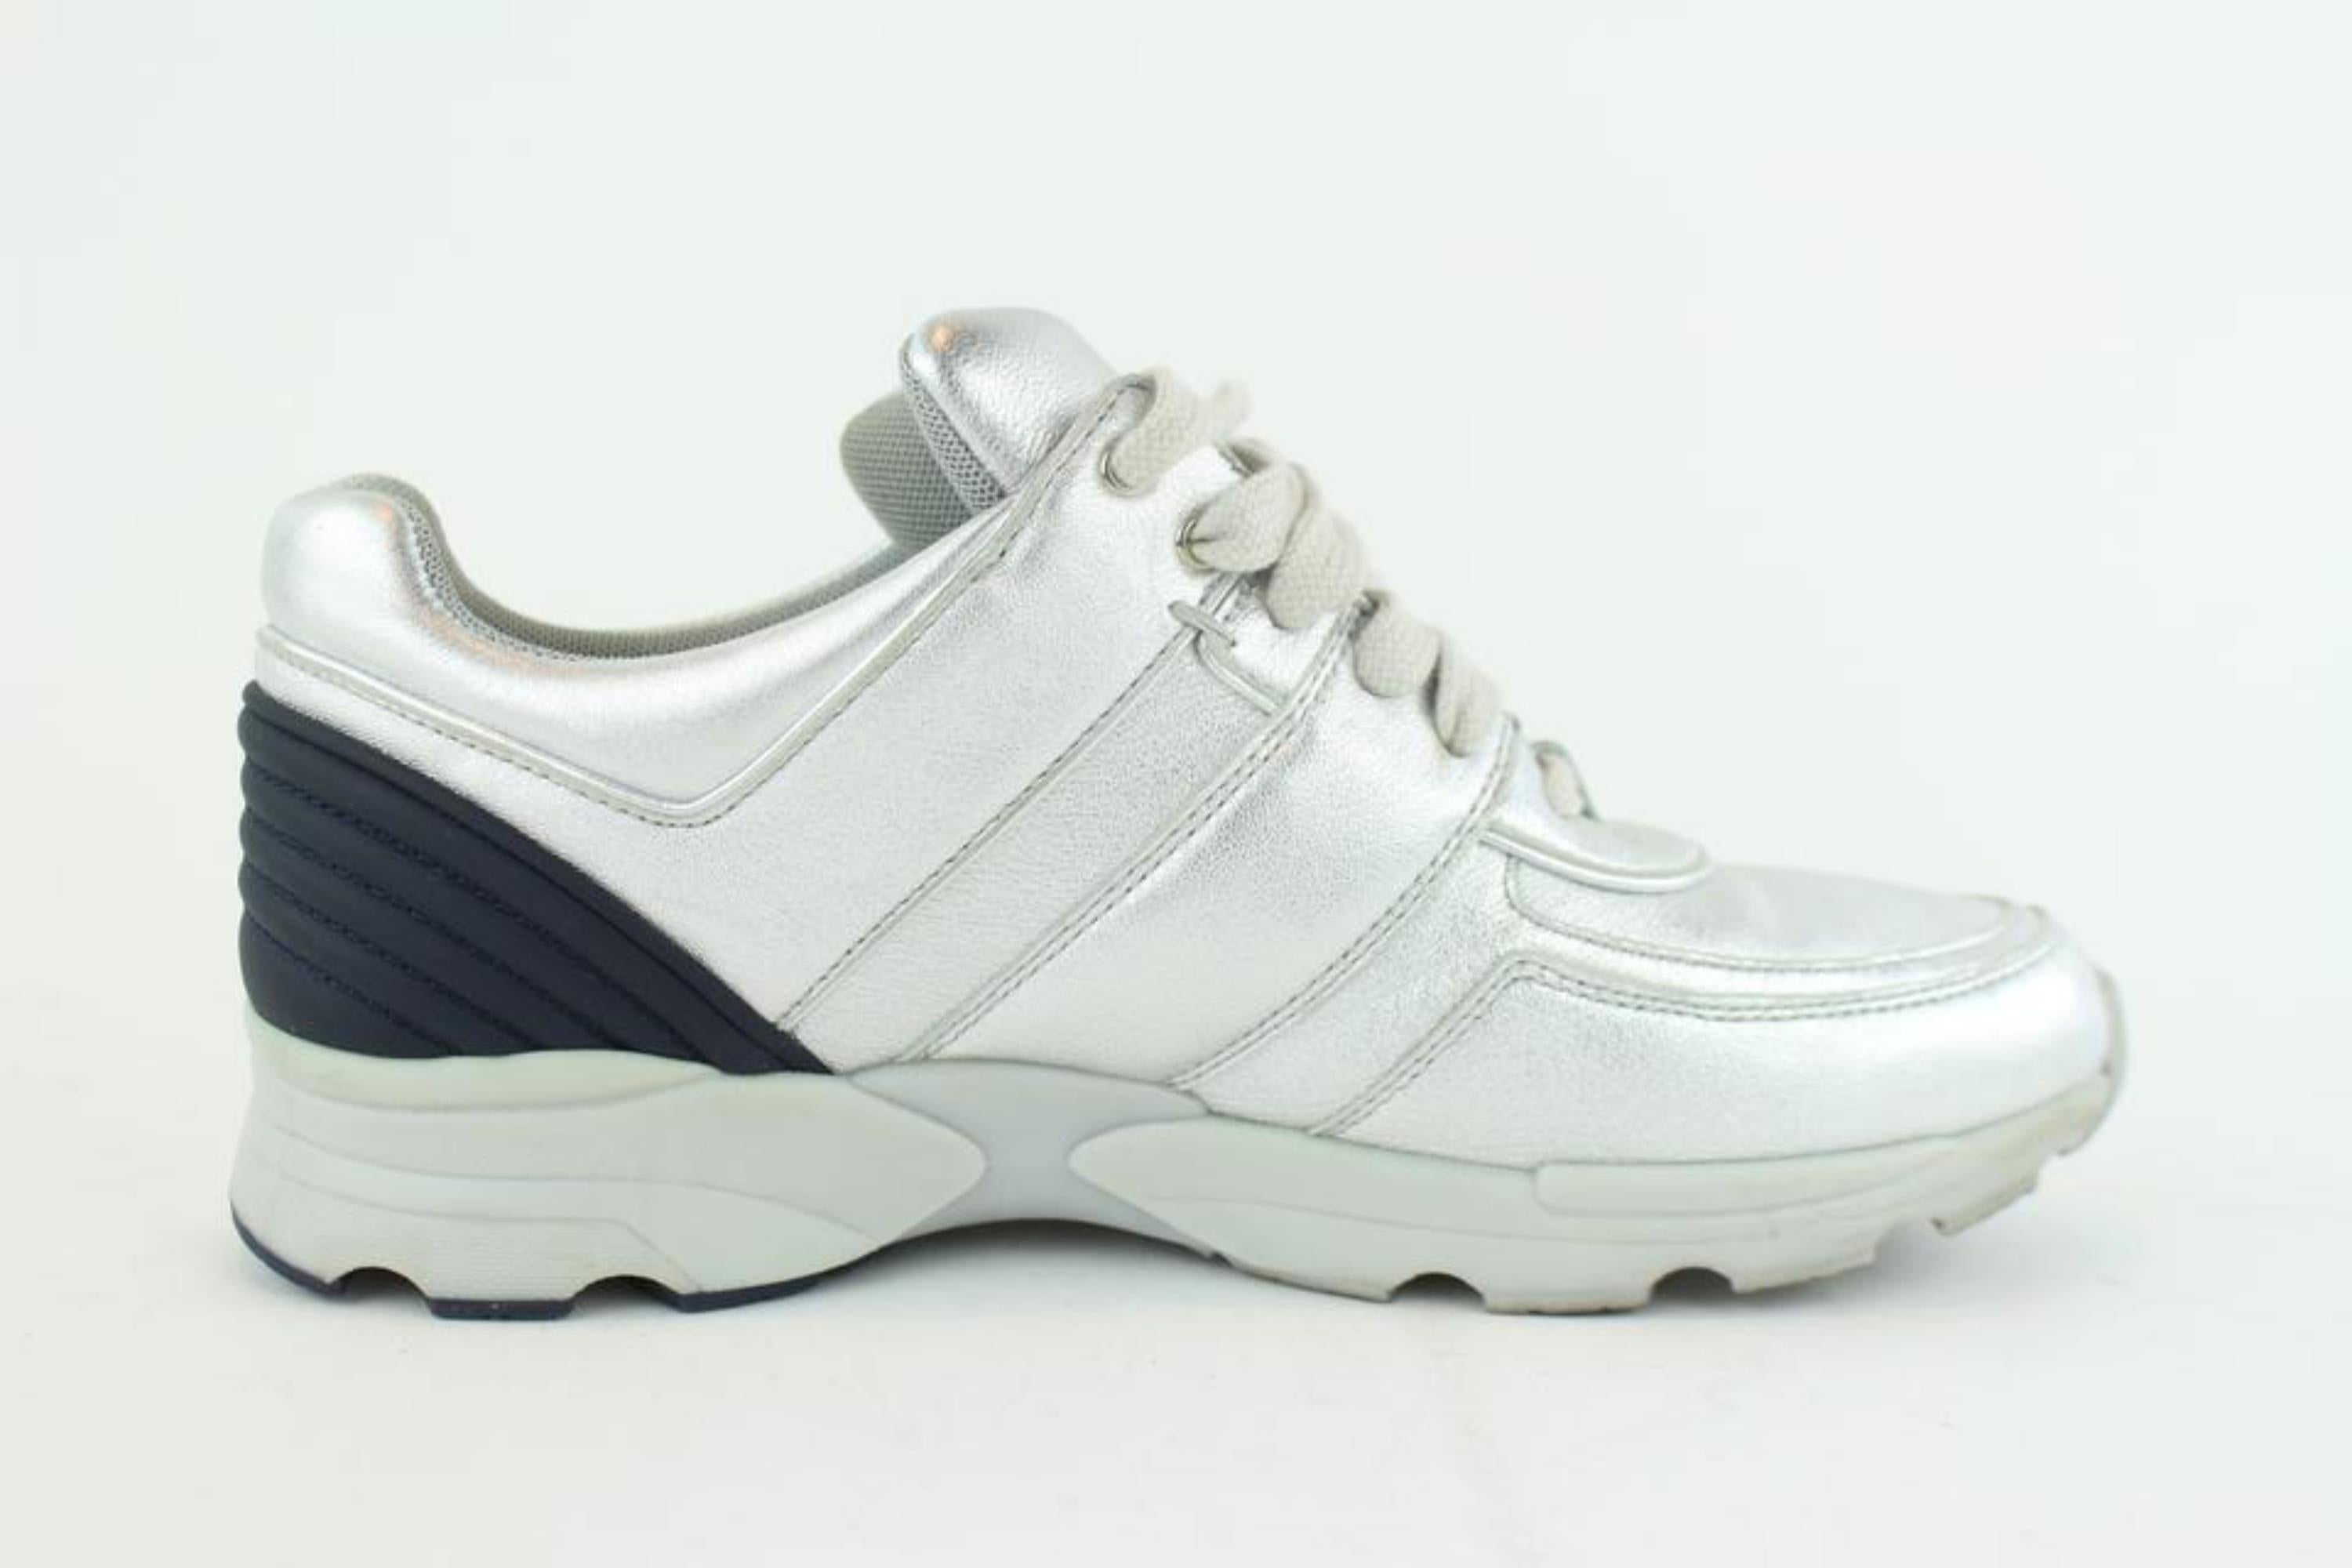 Chanel Silver 16s Metallic Bicolor Trainer 1cz1005 Sneakers For Sale 4